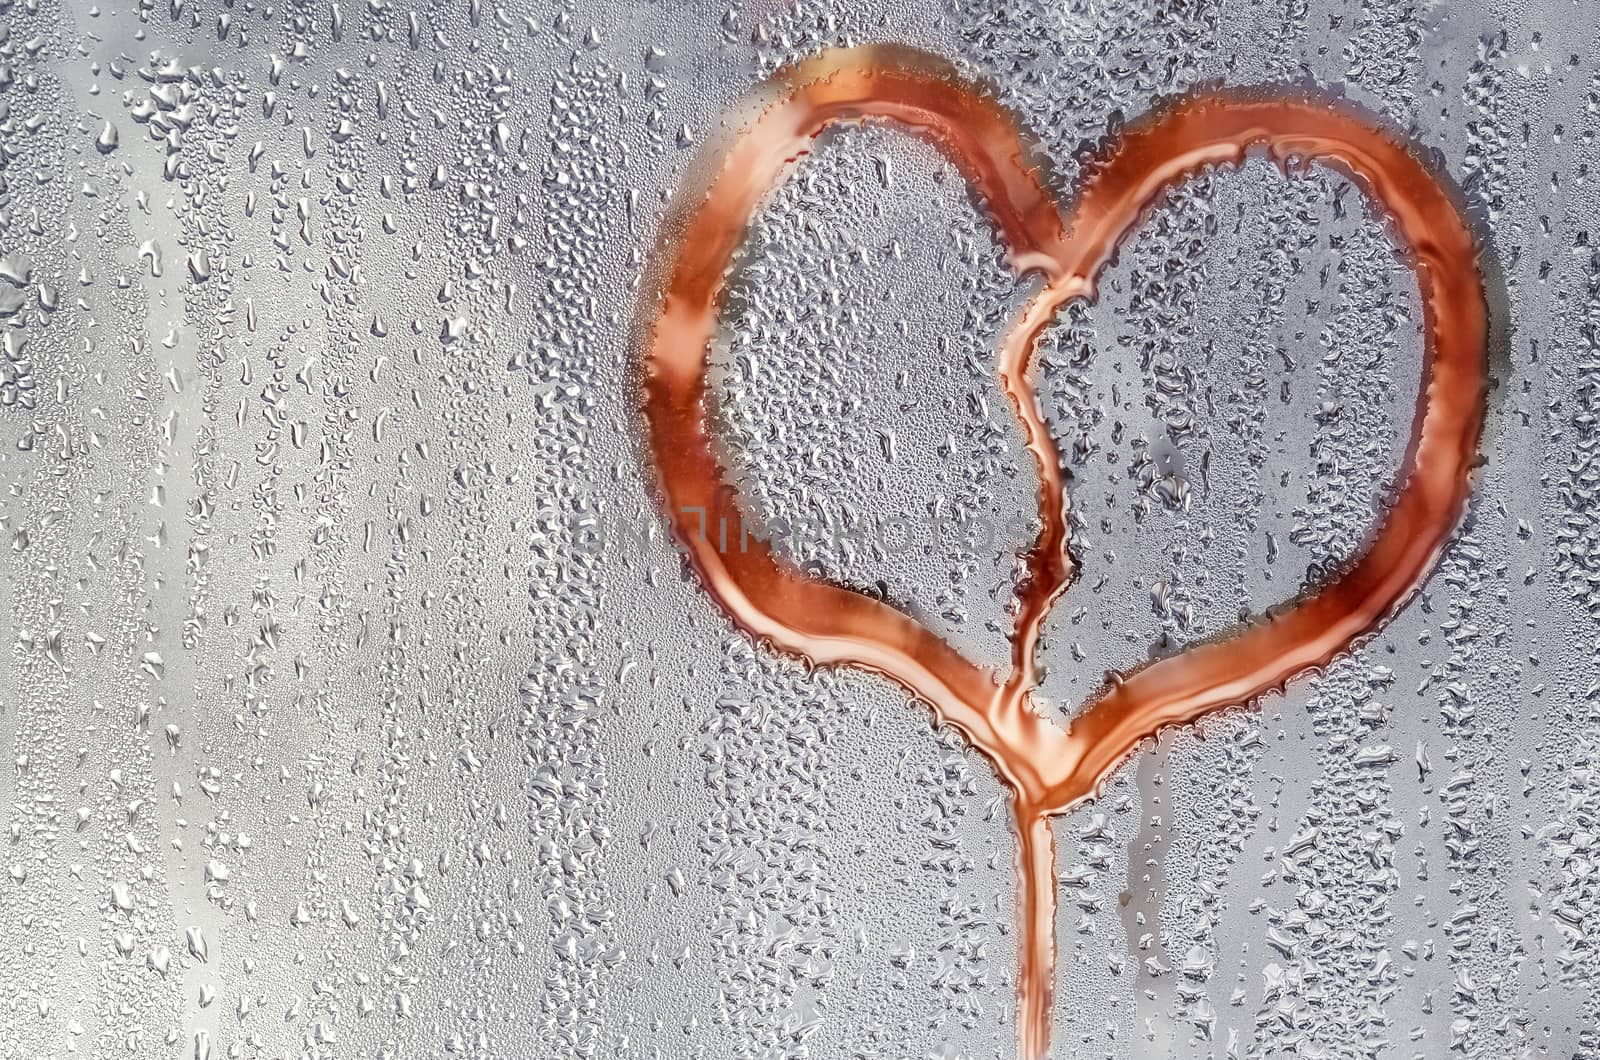 Textured background with drops on glass and painted heart.